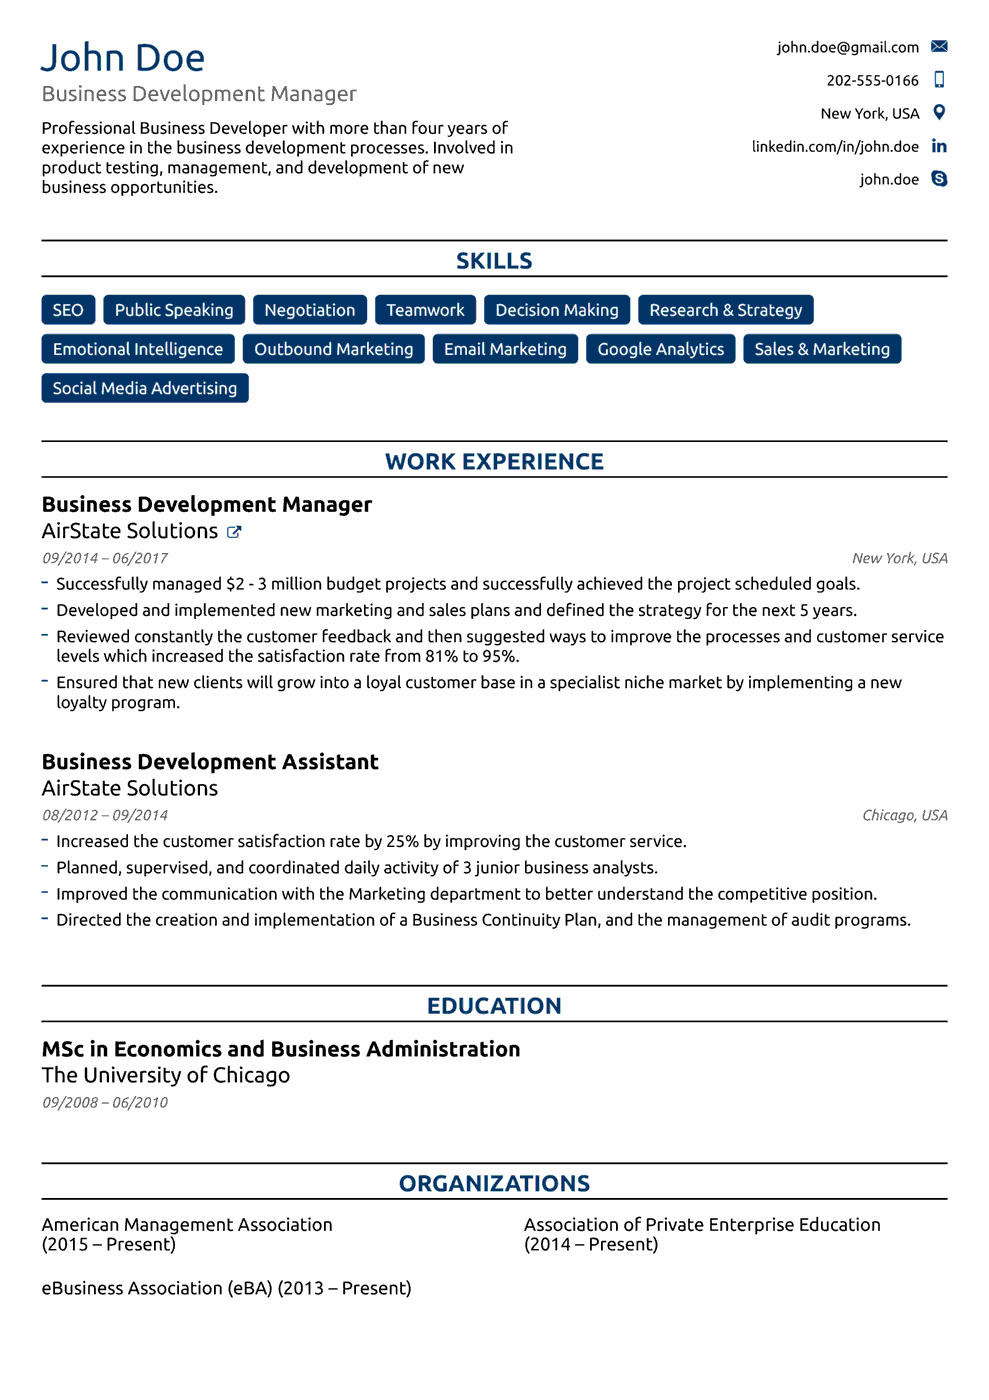 Resume Templates Free College Resume Template resume templates free|wikiresume.com